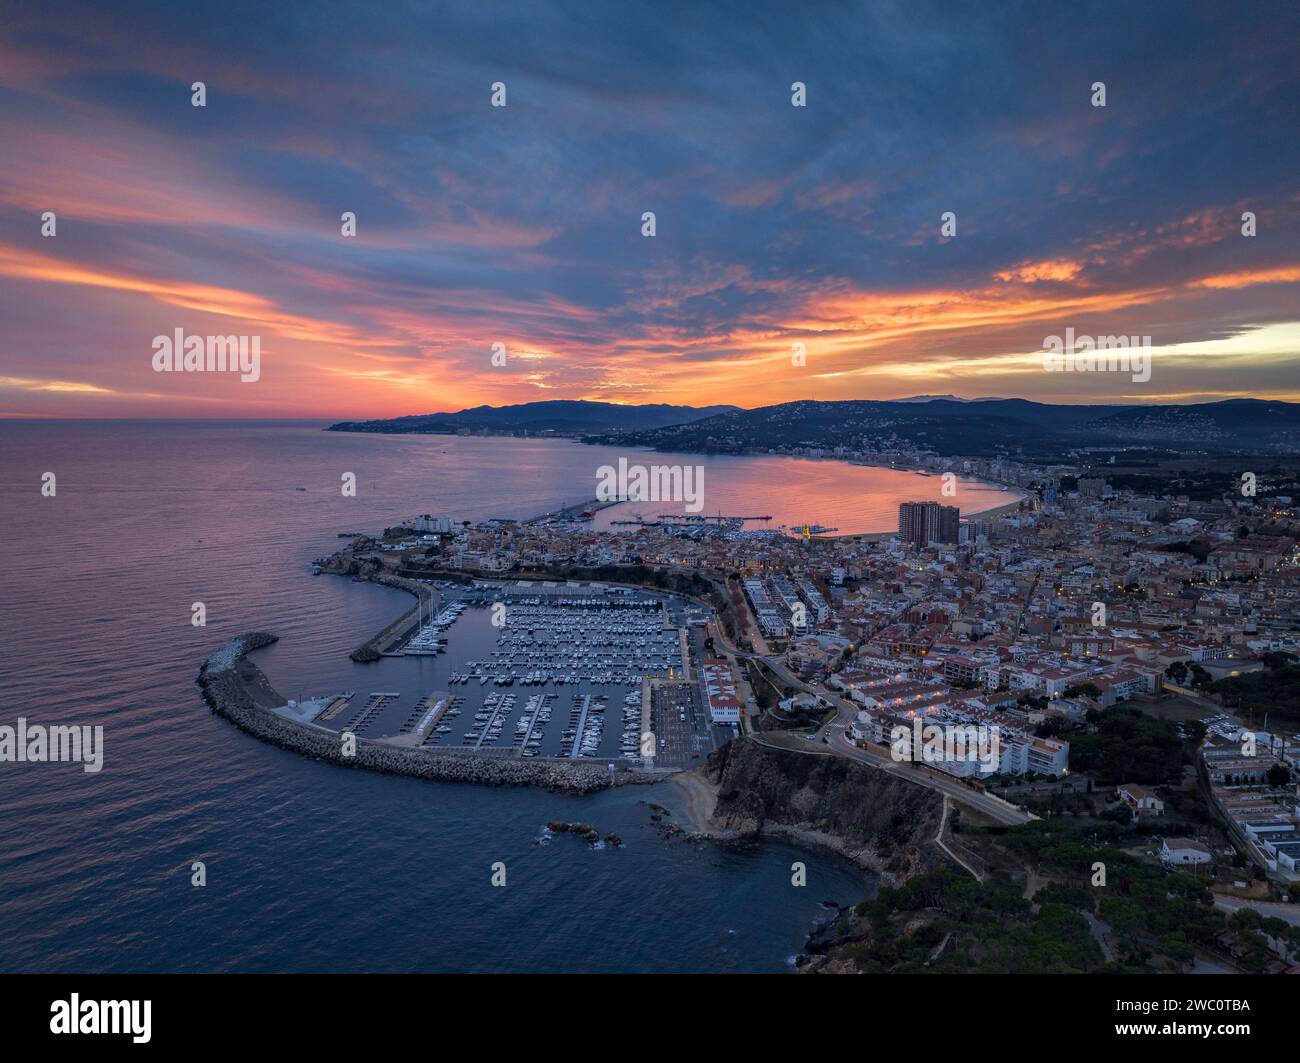 Sunset with a red sky over the bay and city of Palamós. Aerial view (Costa Brava, Baix Empordà, Girona, Catalonia, Spain) Stock Photo